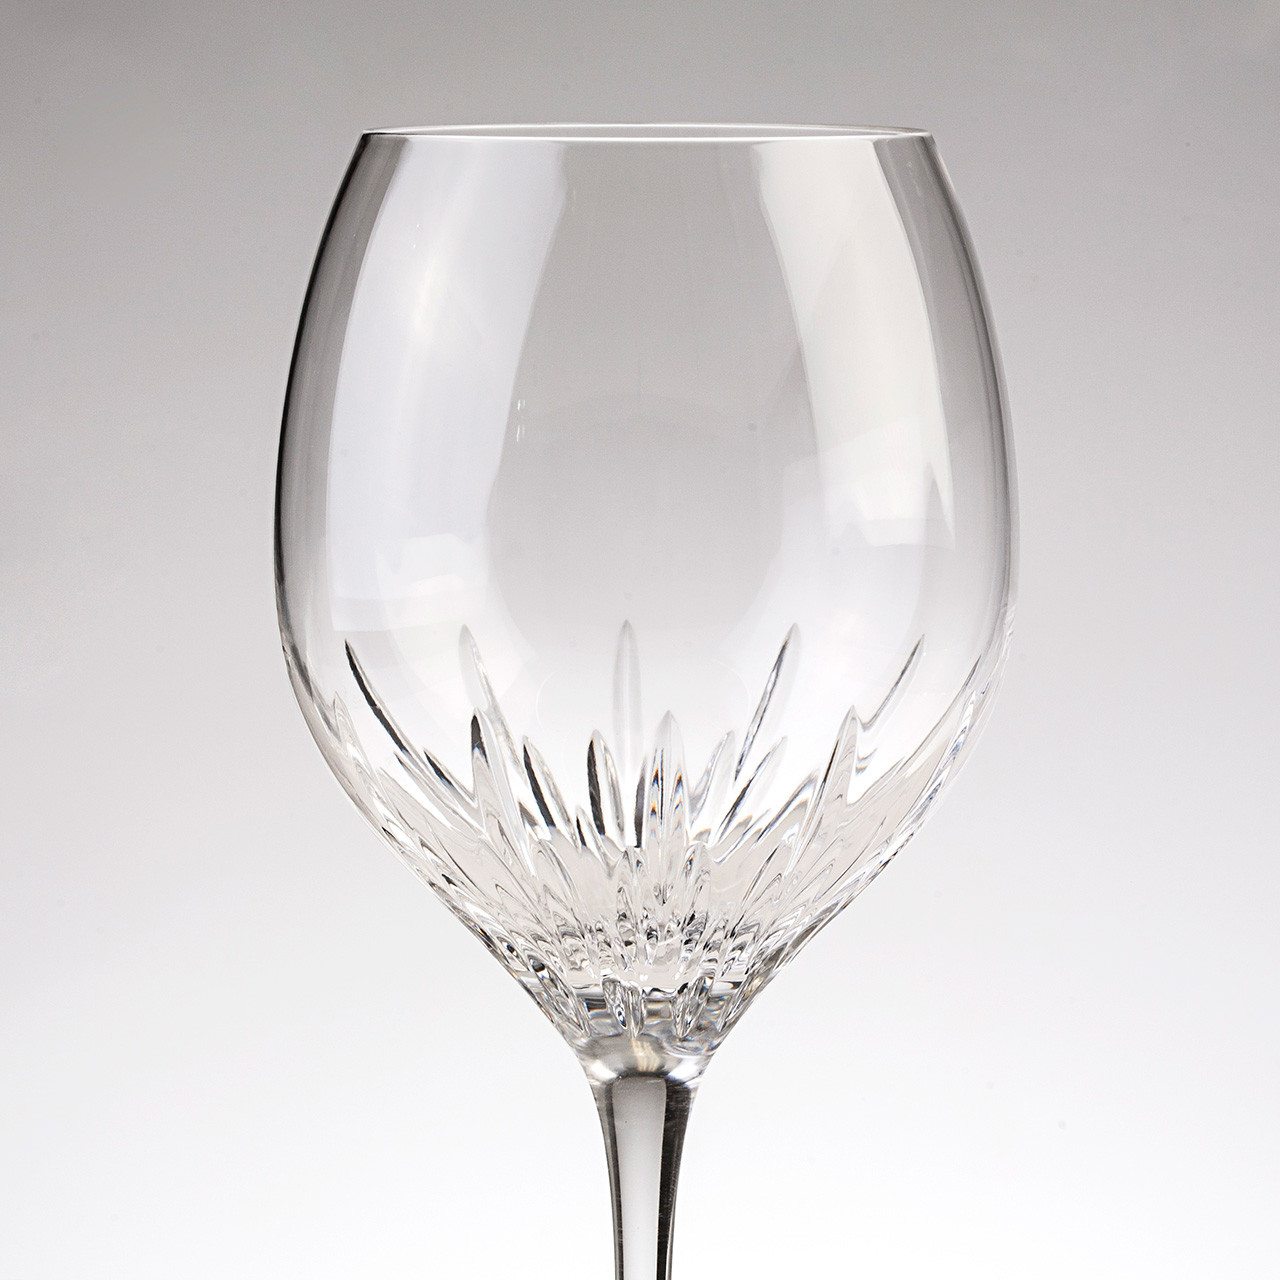 15 attractive Waterford Crystal Lismore Vase 8 2024 free download waterford crystal lismore vase 8 of stem barware william ashley china regarding goblet